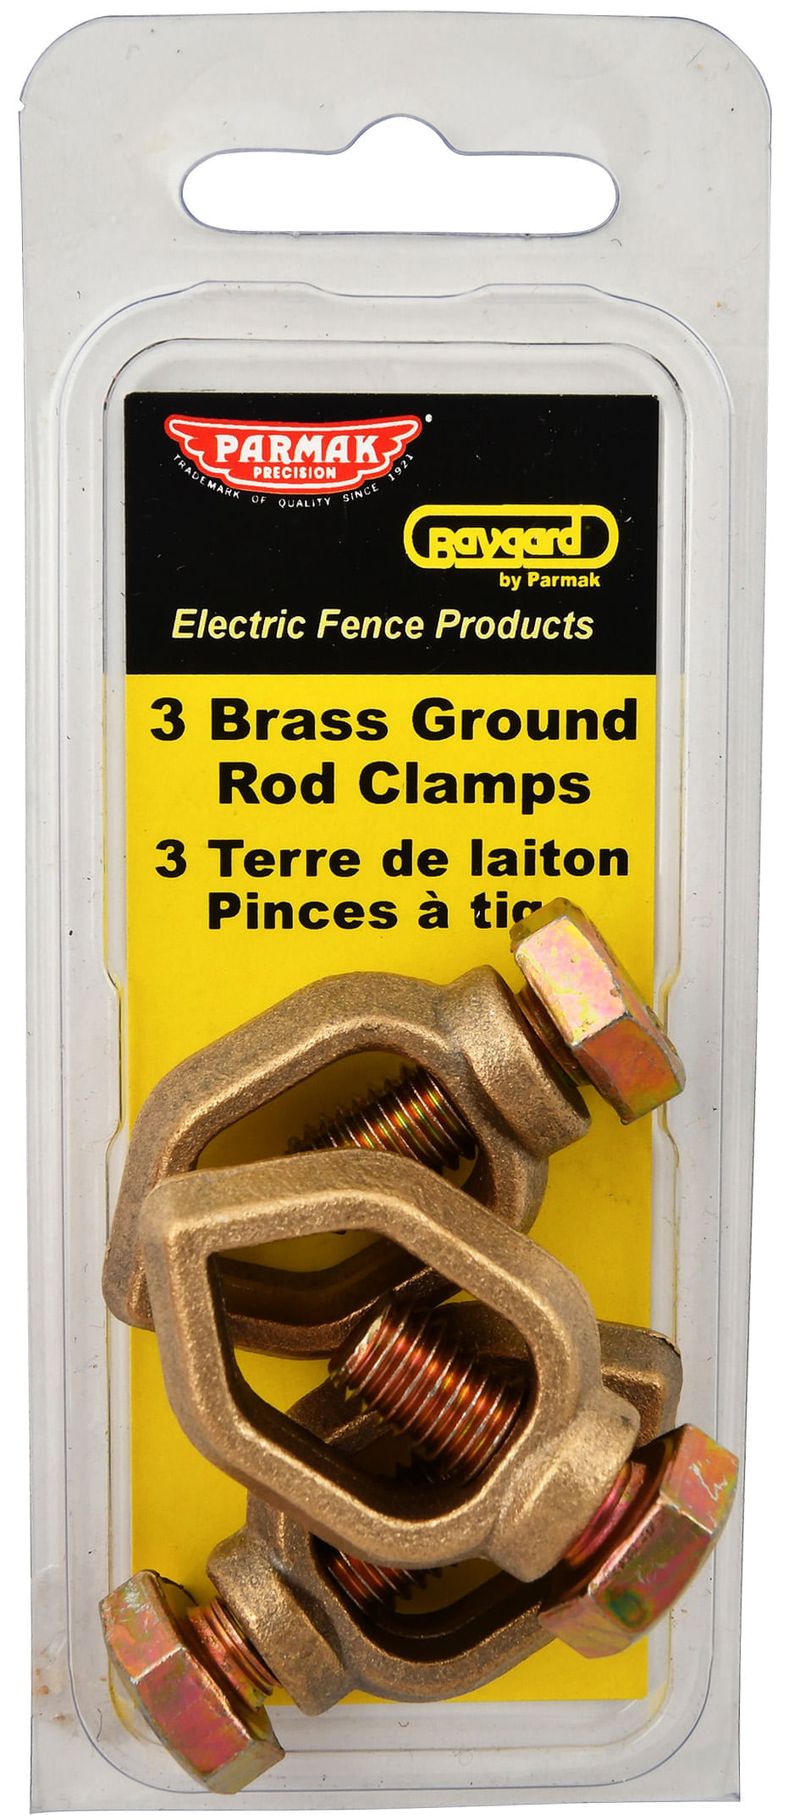 Brass-Grounding-Rod-Clamps-3-pack